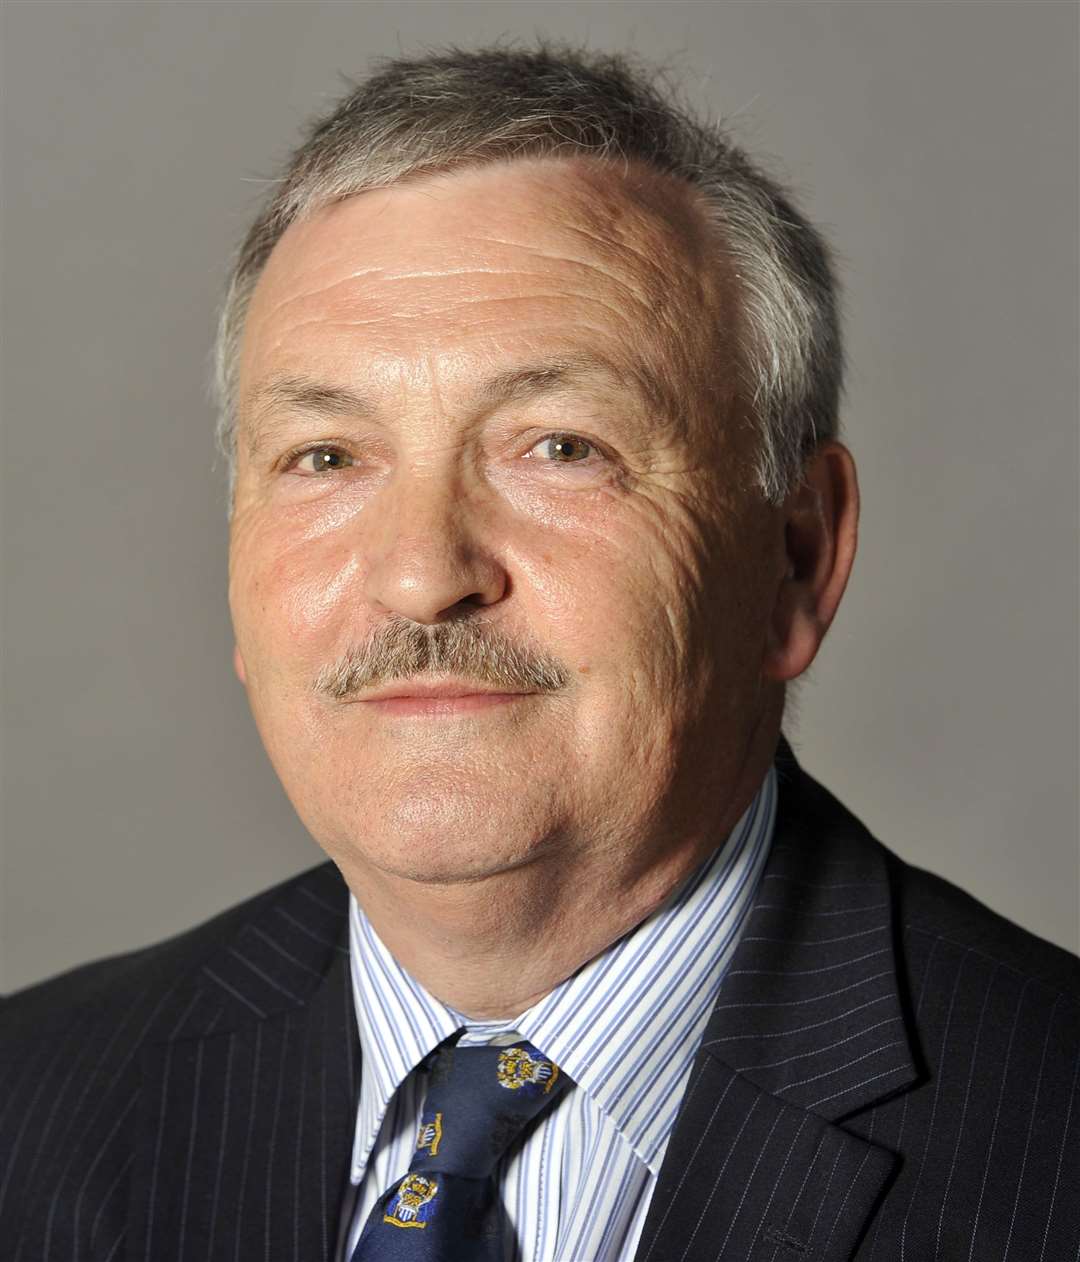 Medway Council leader Alan Jarrett says the lack of 'political consensus' is behind the plans being delayed as officers have to restart a process again